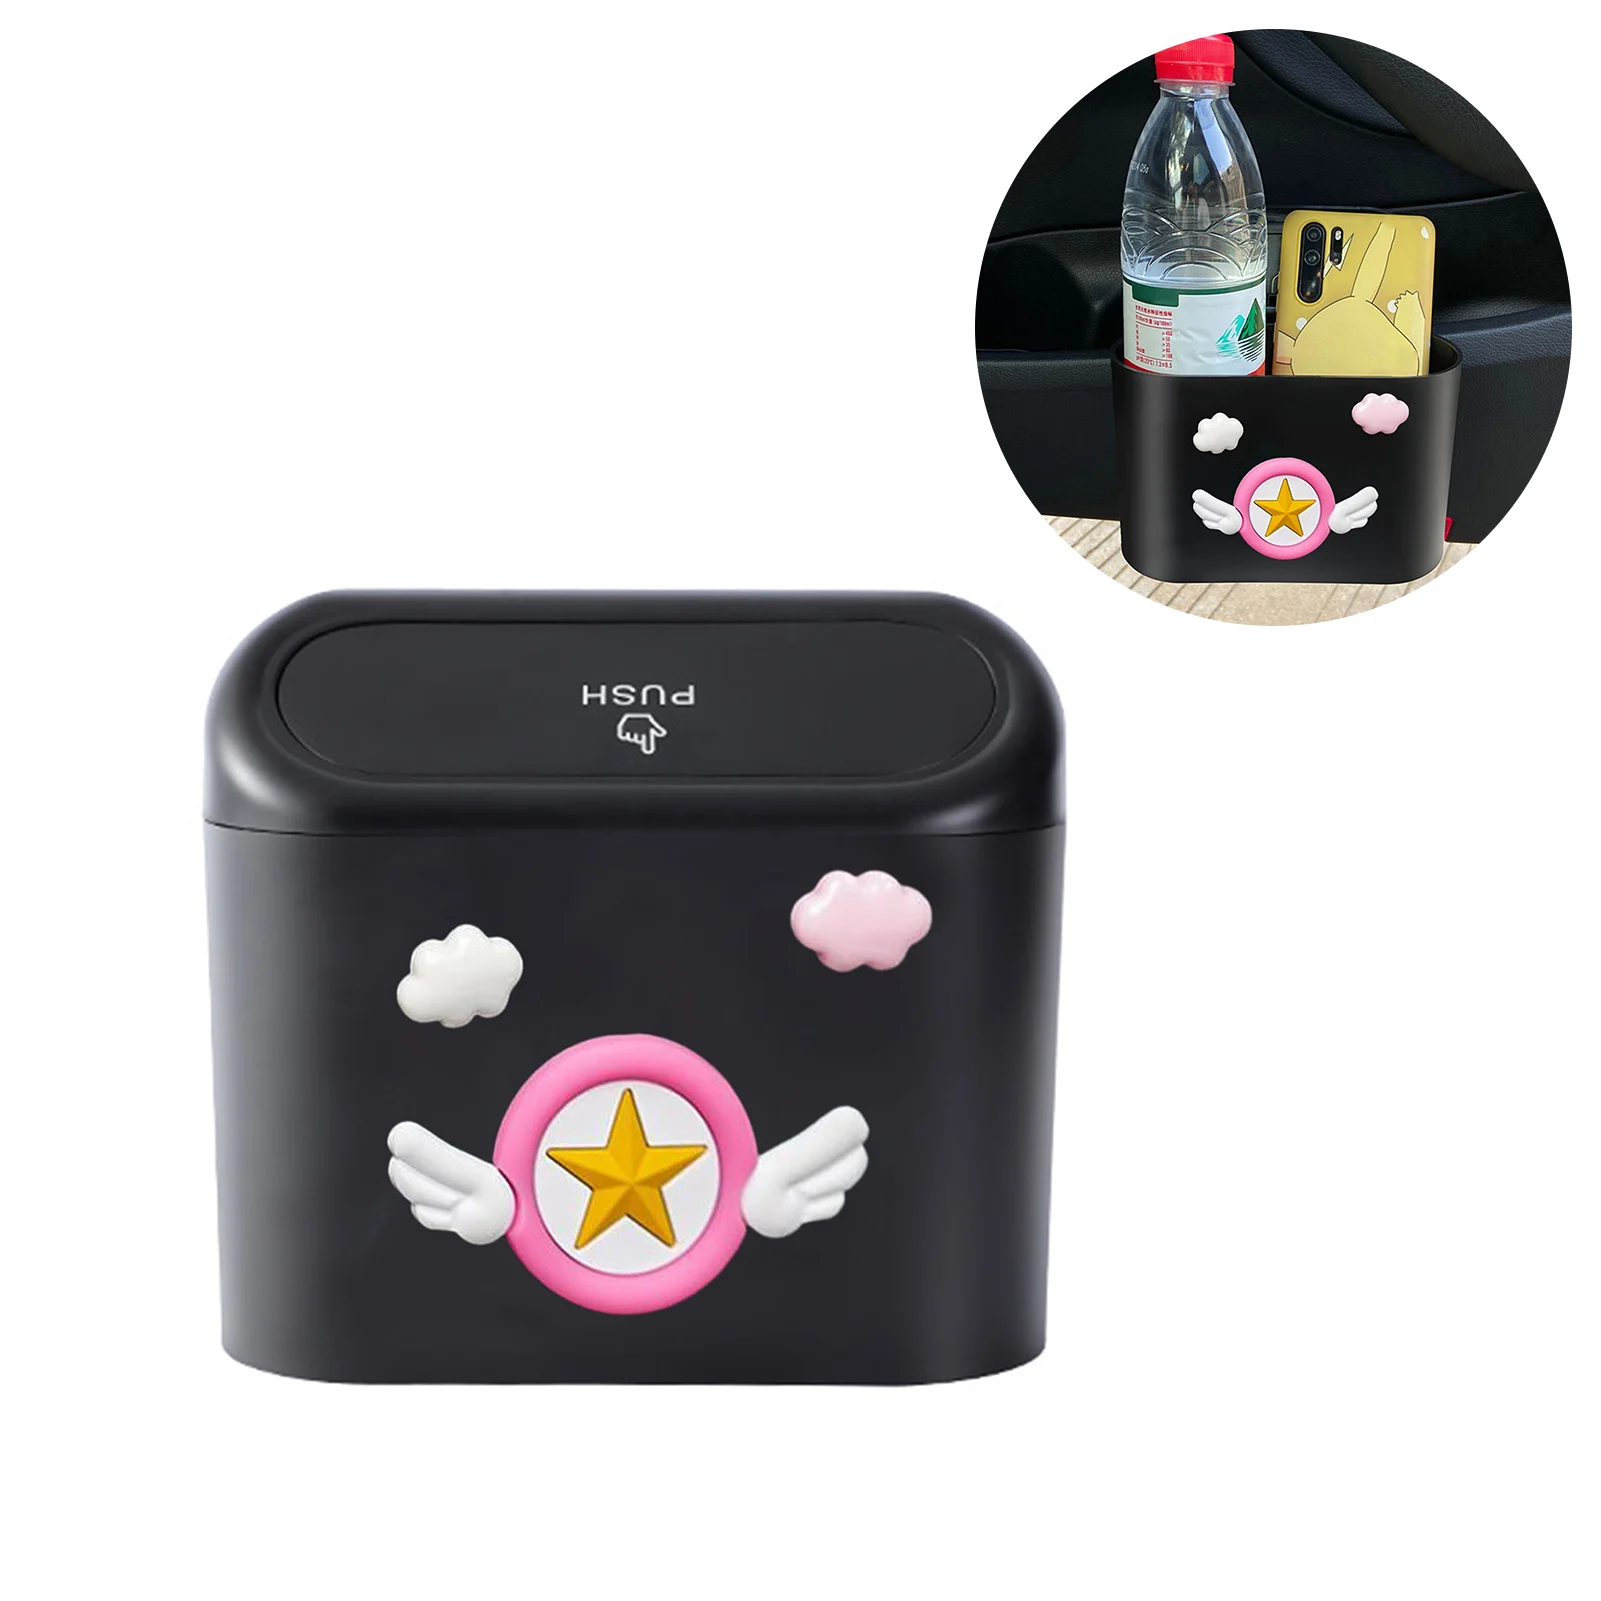 Car Garbage Can Leak-Proof Car Trashcan With Cute PatternsMultipurpose Vehicle Trash Can Waterproof And Leak-Proof Car Garbage